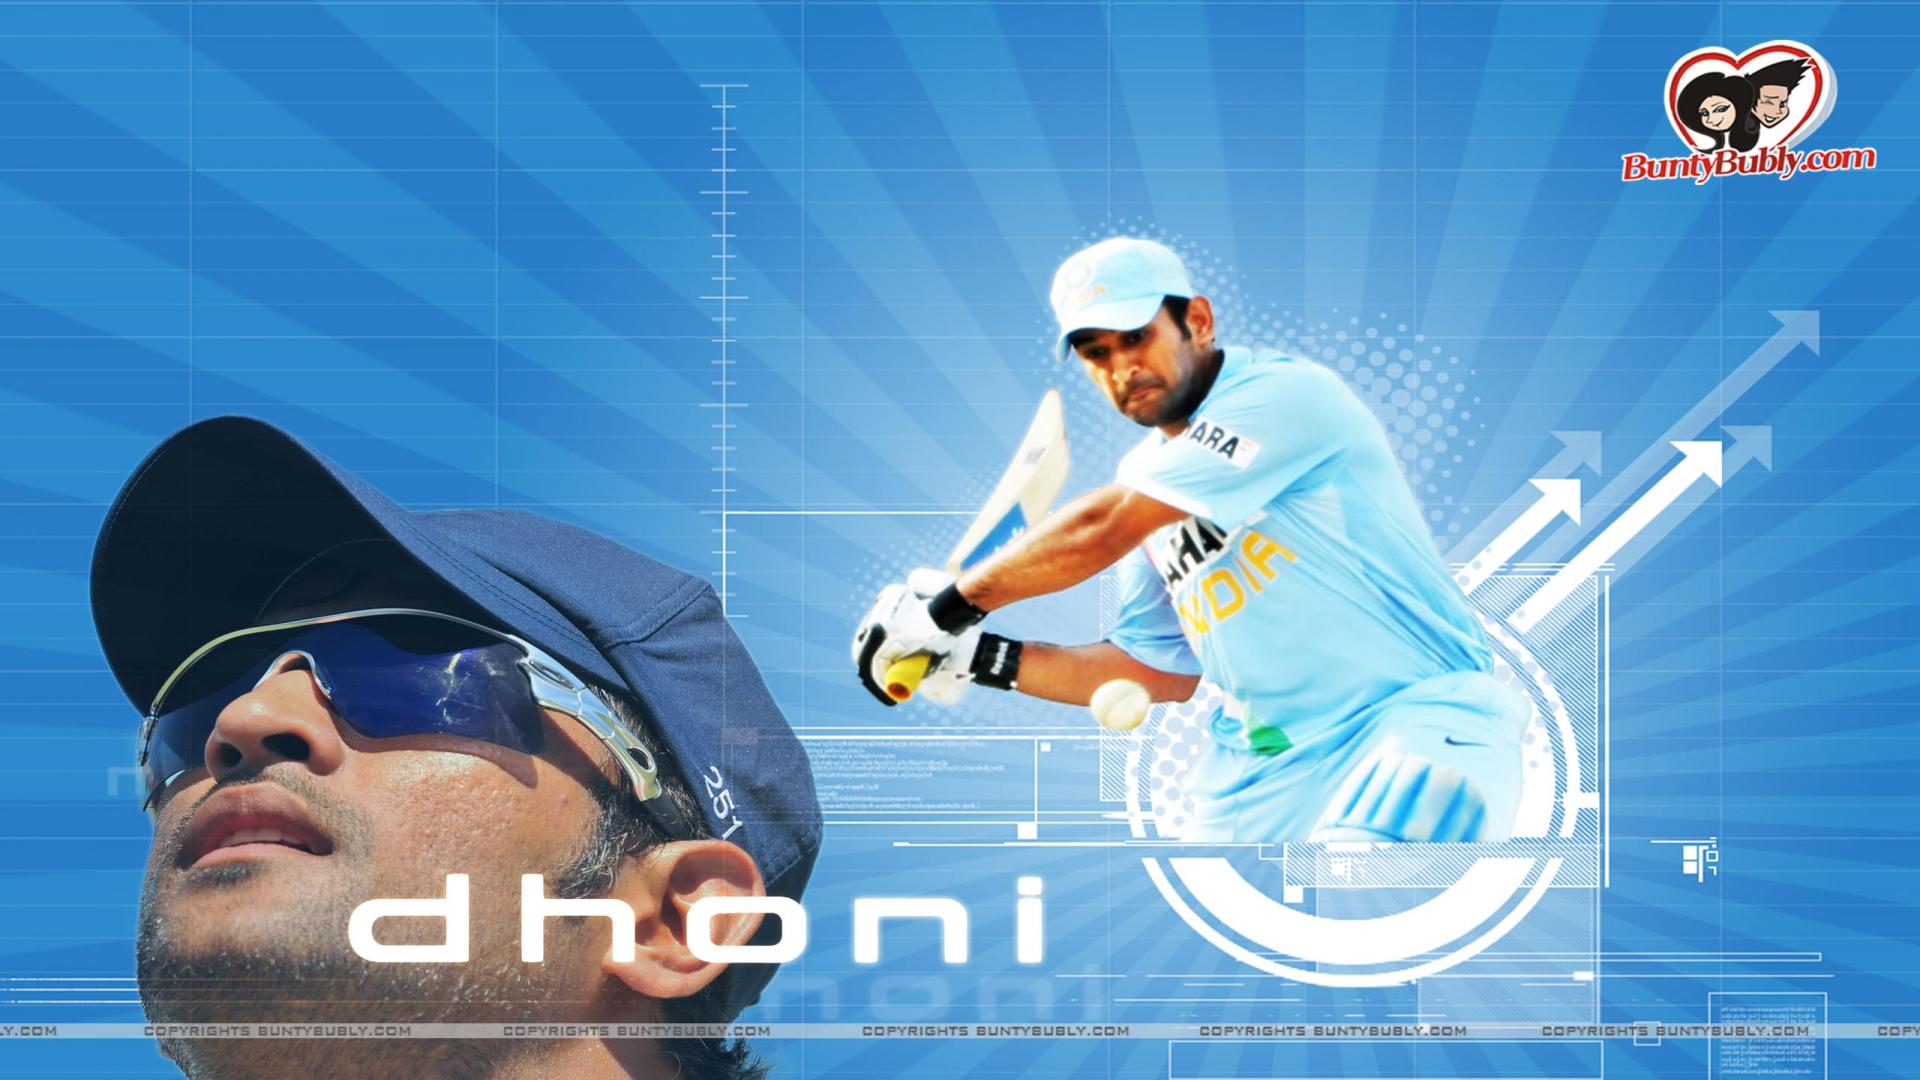 Download High quality Cricket wallpaper / Sports / 1920x1080